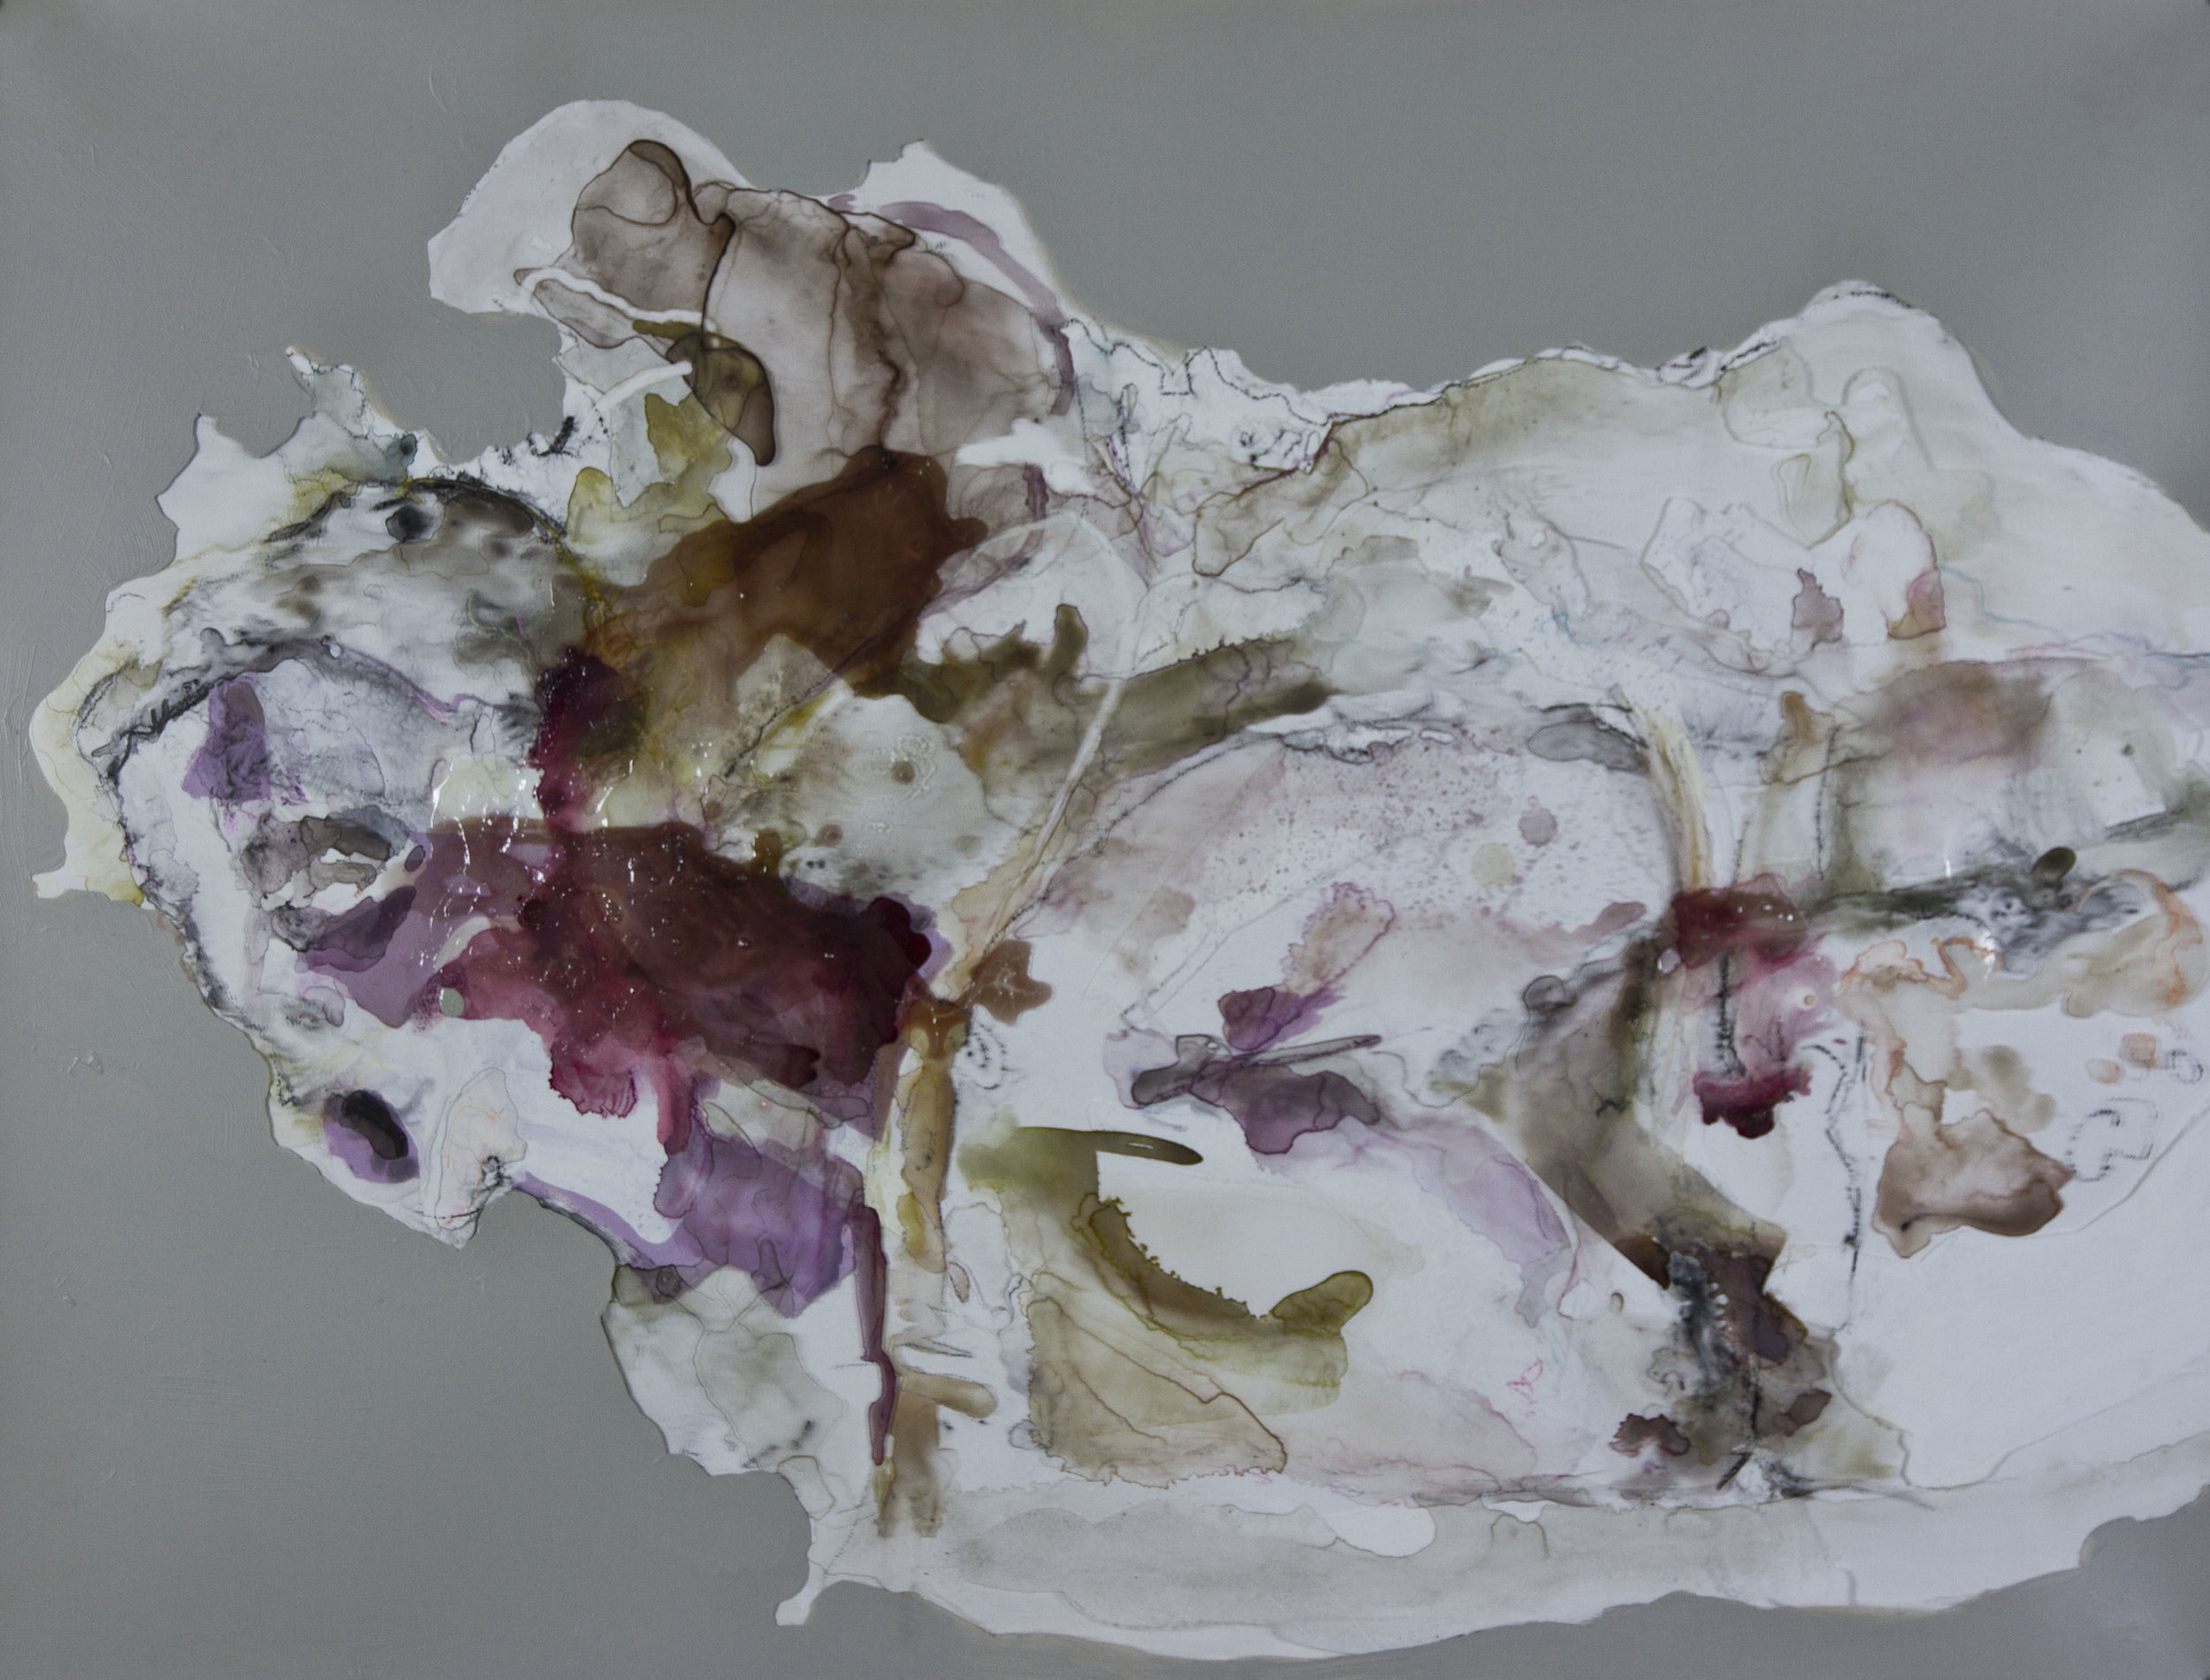 Born to Blossom, Bloom to Perish, 2012, watercolor and acrylic on mylar, 30x40 inches